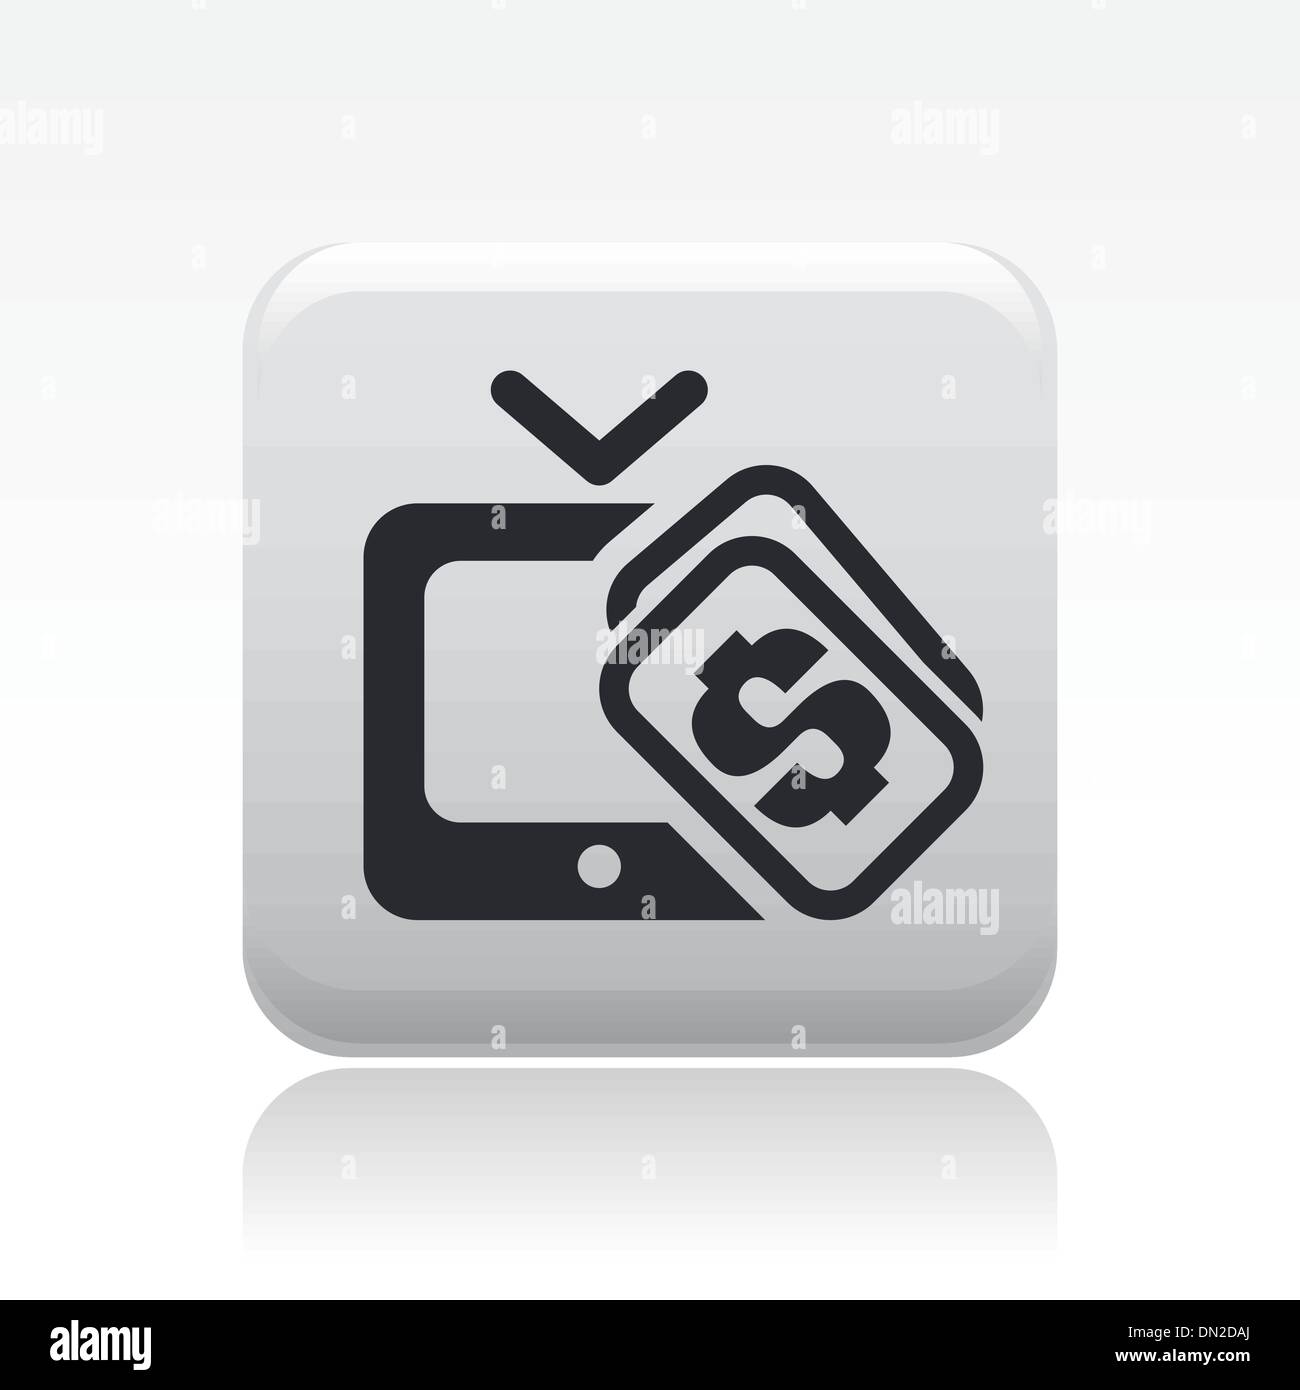 Vector illustration of single pay tv icon Stock Vector